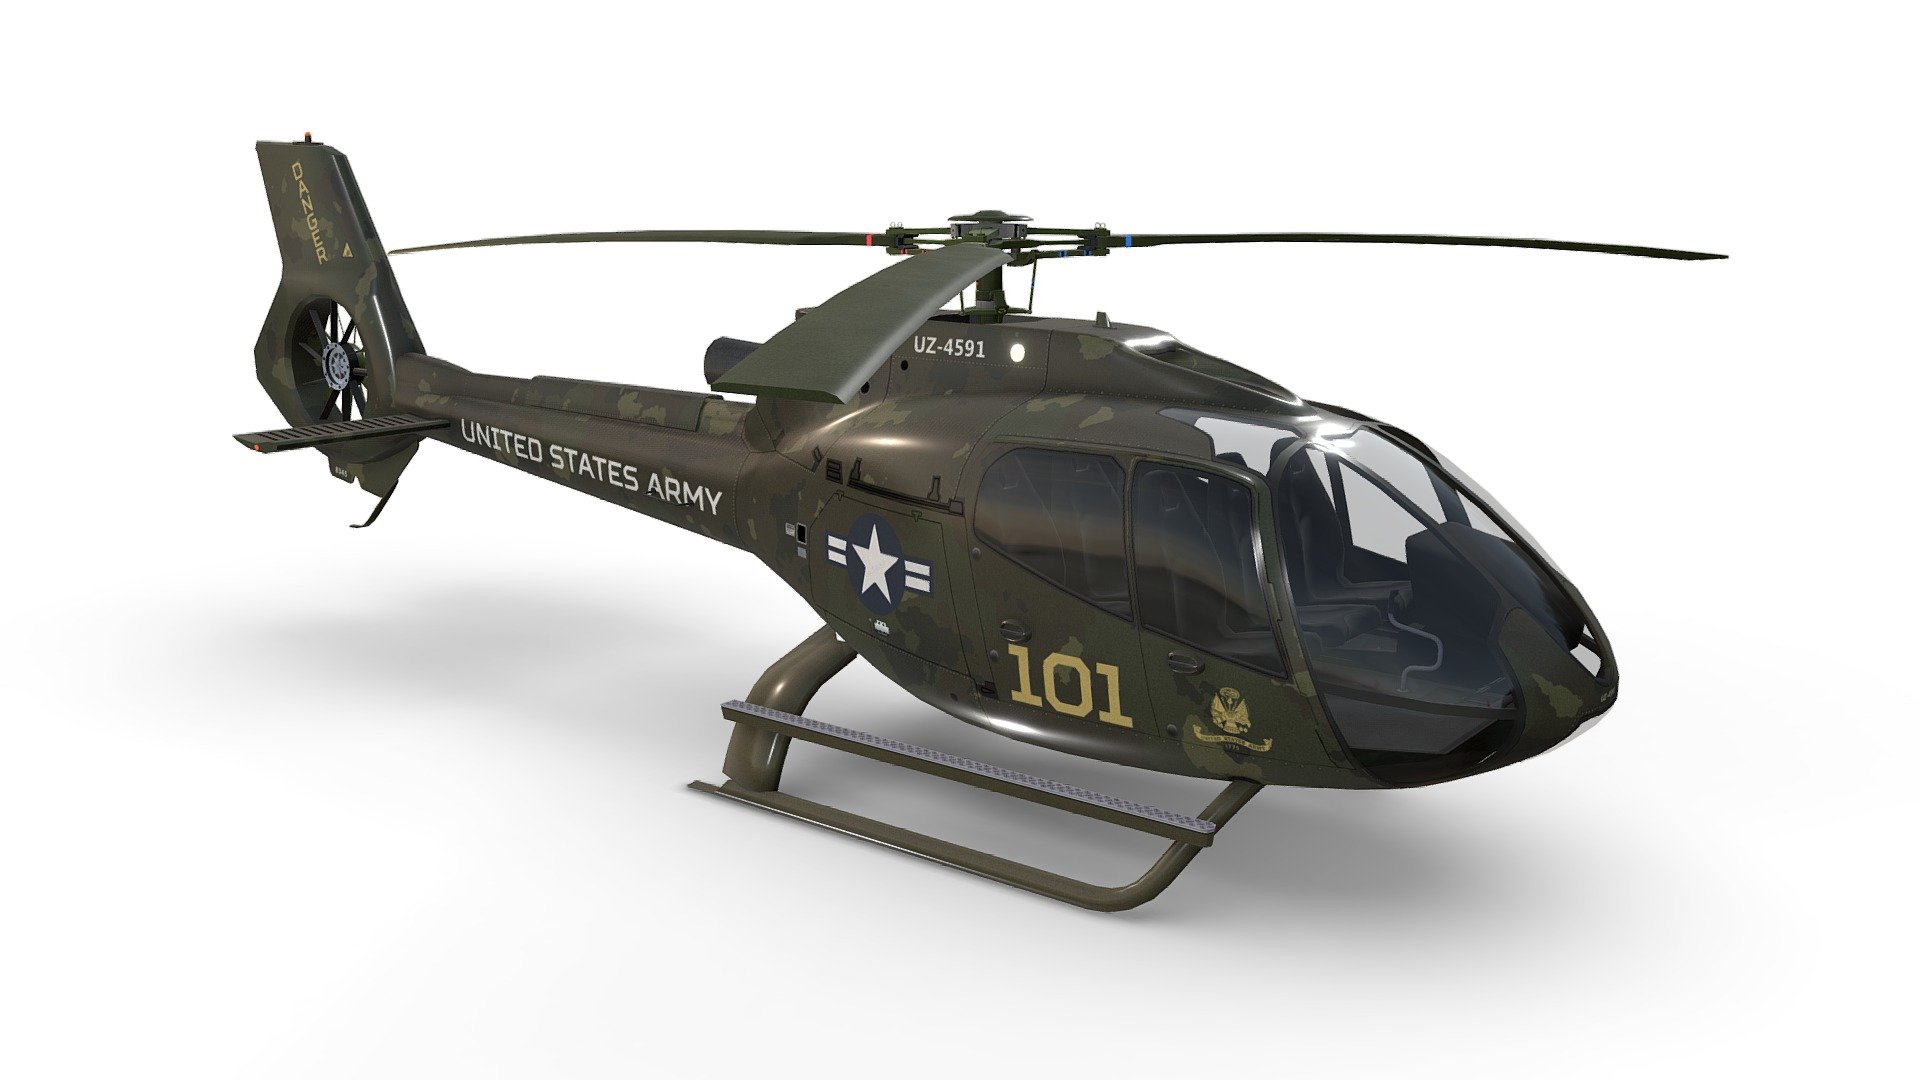 US Army Helicopter Airbus H130 Livery 36. Game ready, realtime optimized Airbus Helicopter H130 with high visual accuracy. Both PBR workflows ready native 4096 x 4096 px textures. Clean lowpoly mesh with 4 preconfigured level of details LOD0 19710 tris, LOD1 10462 tris, LOD2 7388 tris, LOD3 5990 tris. Properly placed rotors pivots for flawless rotations. Simple capsule built interior that fits perfectly the body. 100% human controlled triangulation. All parts 100% unwrapped non-overlapping. Made using blueprints in real world scale meters. Included are flawless files .max (native 3dsmax 2014), .fbx, and .obj. All LOD are exported seperately and together in each file format 3d model